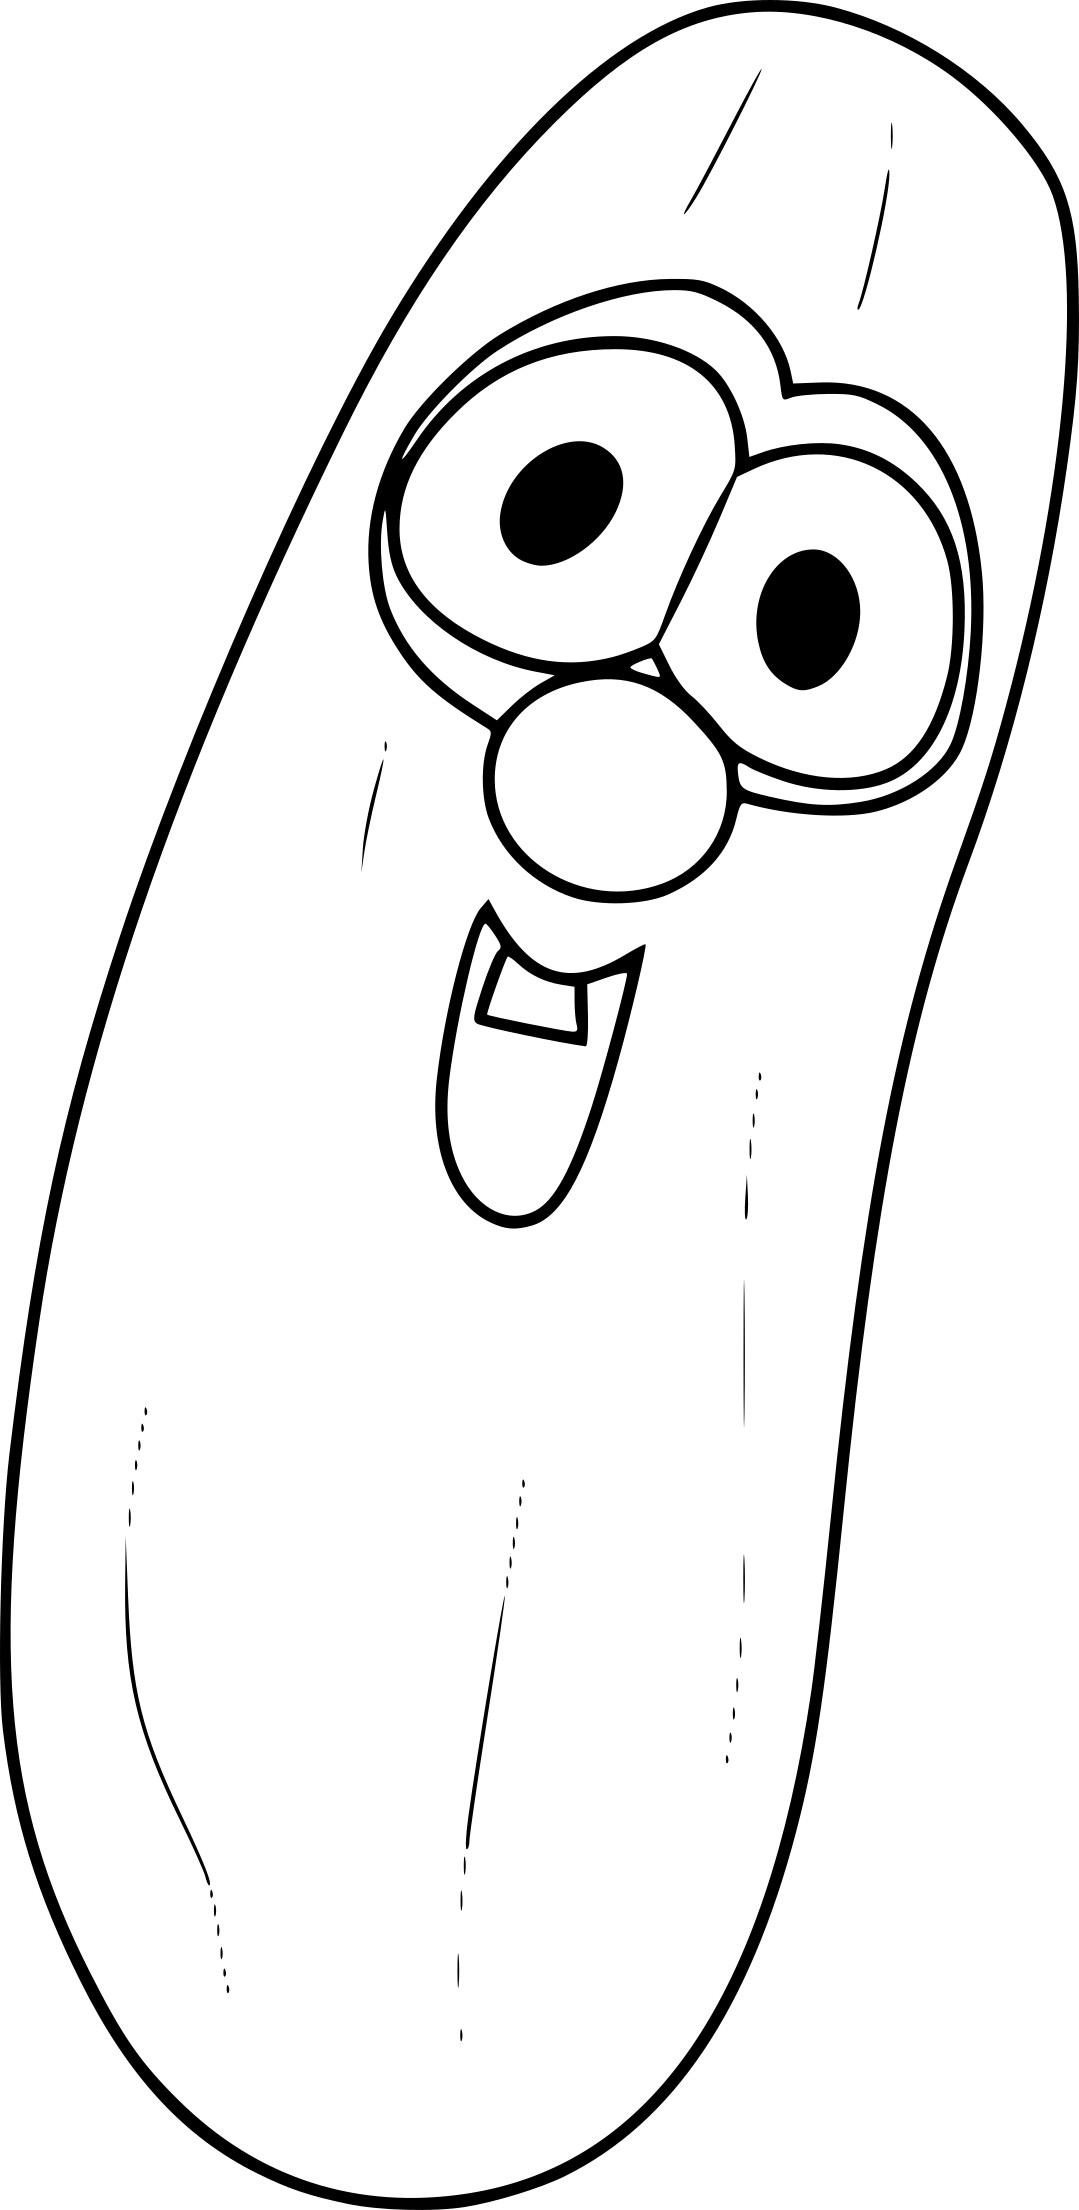 Cucumber Vegetables coloring page